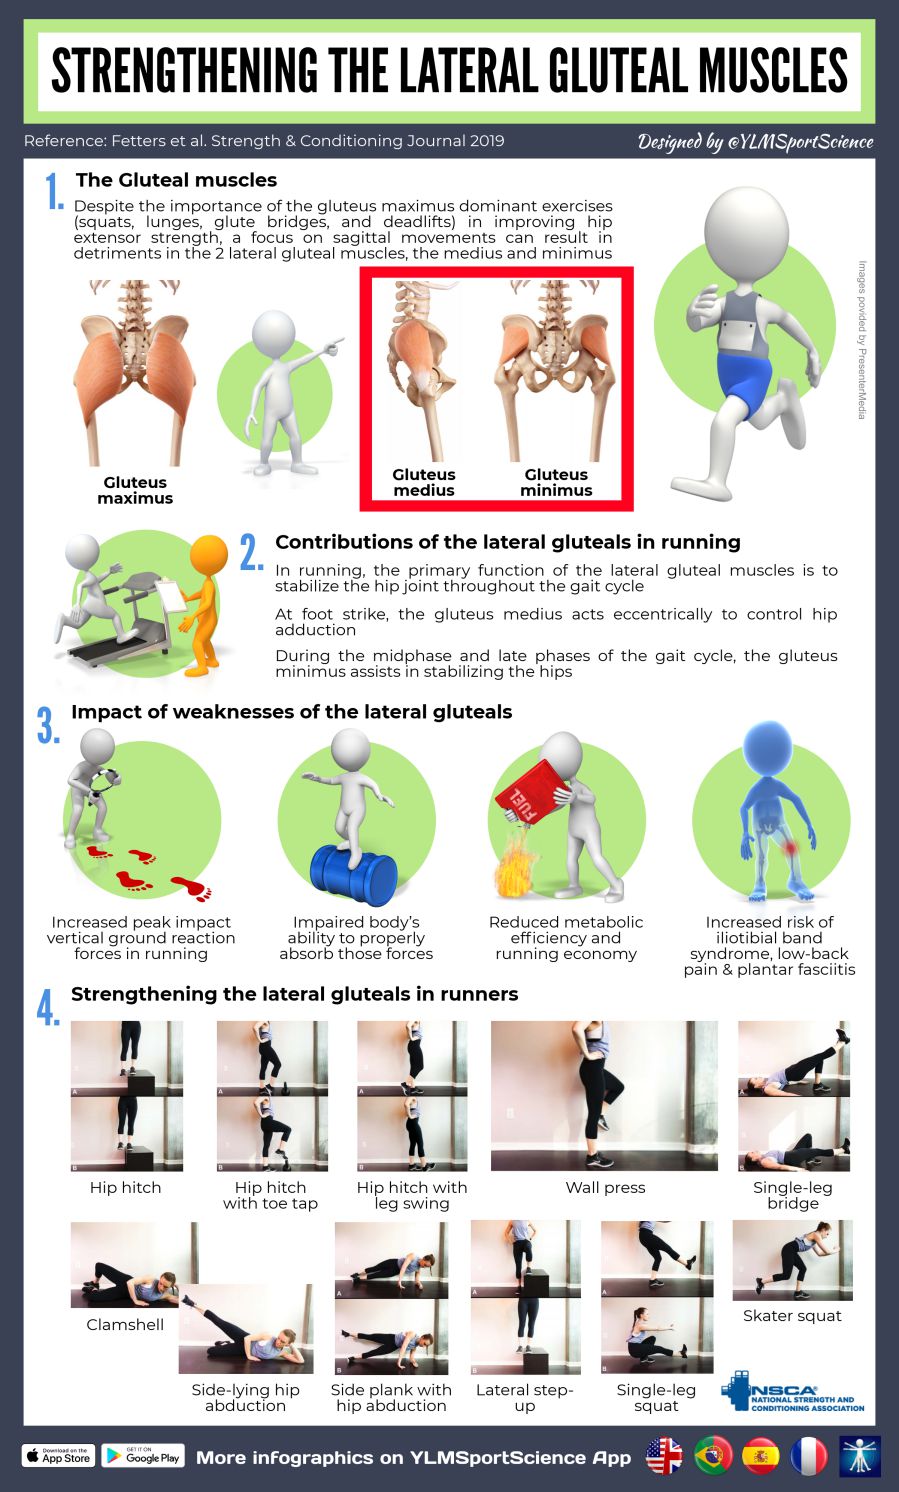 This infographic highlights a study that explores the role of the lateral gluteal muscles and its impact on runners.